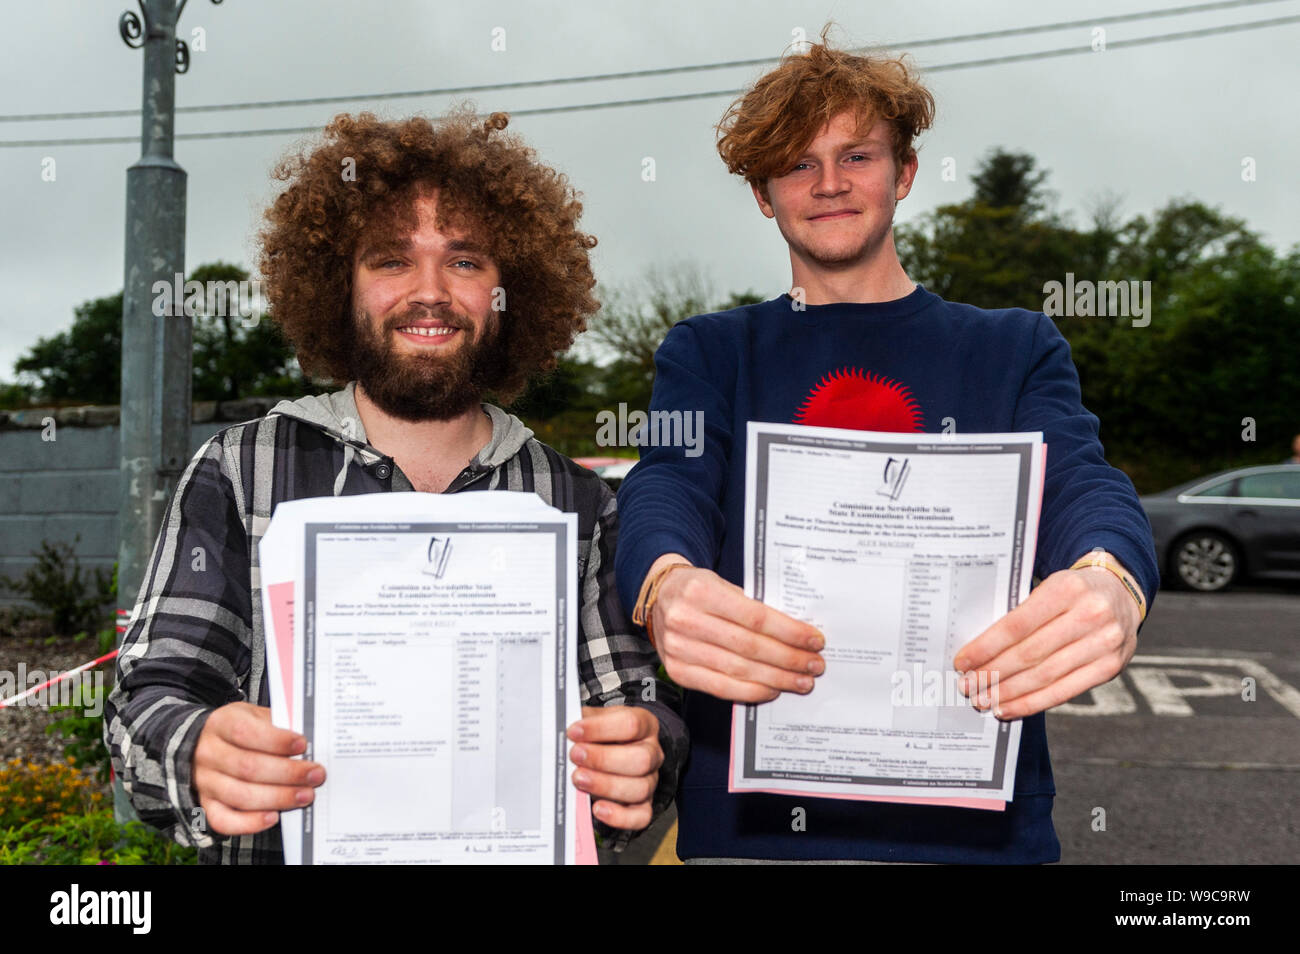 Schull, West Cork, Ireland. 13th Aug, 2019. Almost 59,000 students were due to receive their Leaving Cert results today, a day earlier than previous years. Receiving their results at Schull Community College were James Kelly, Goleen ad Alex Maguire, Schull. Credit: Andy Gibson/Alamy Live News. Stock Photo